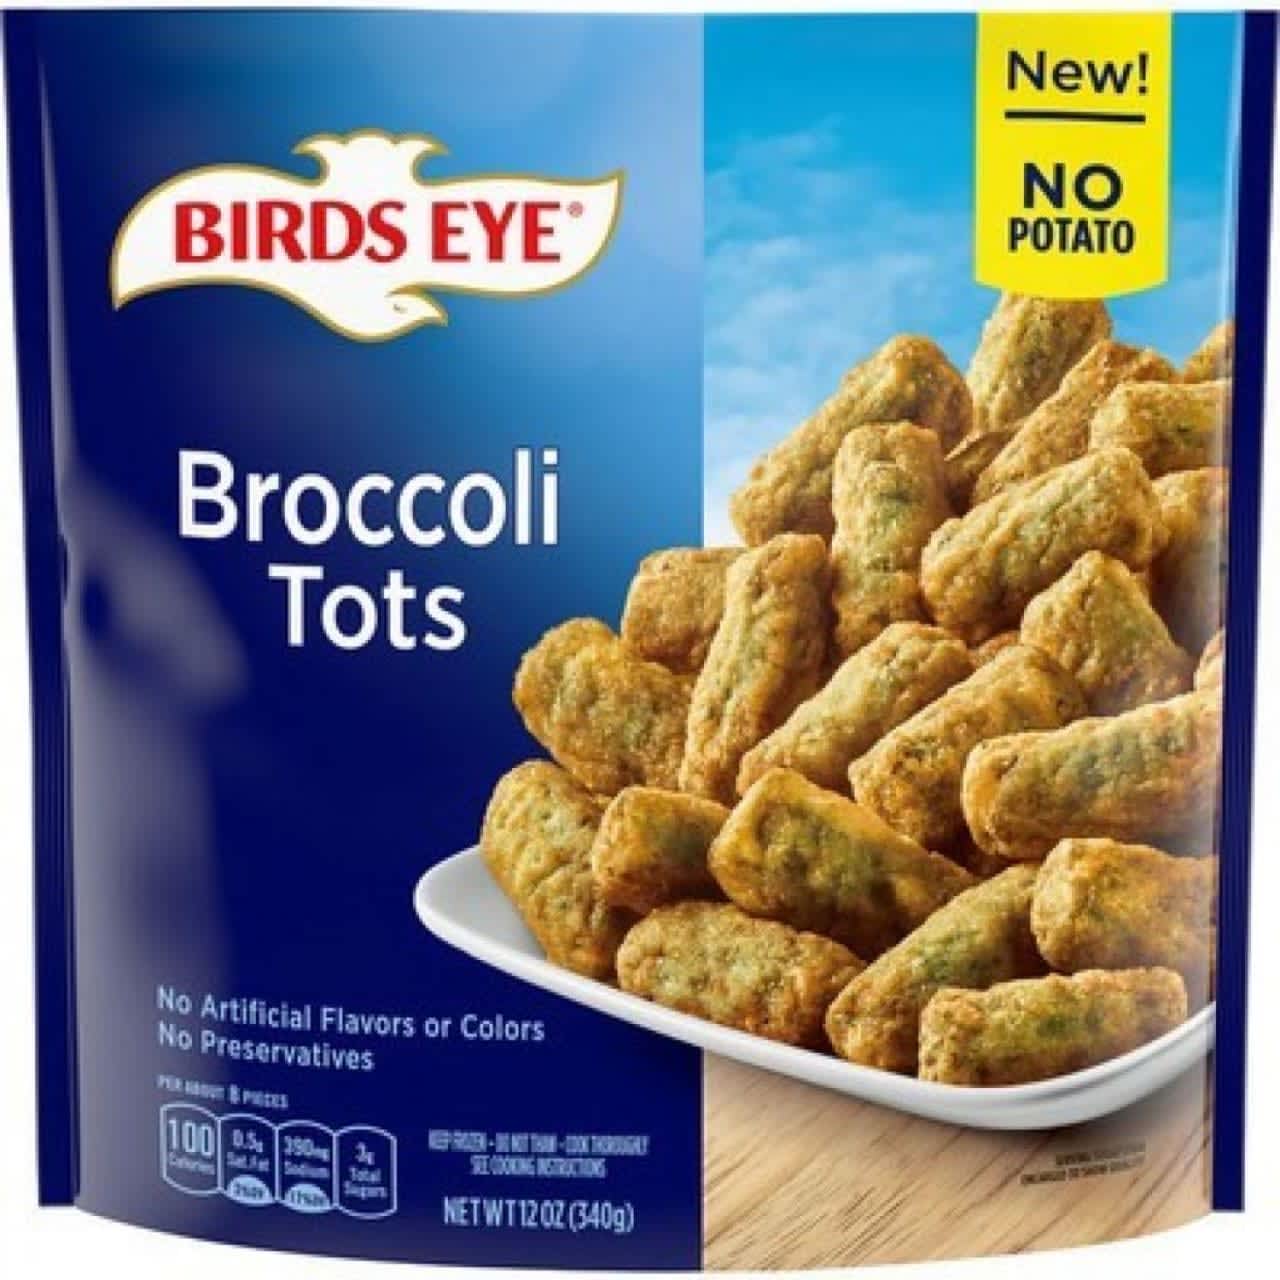 Birds Eye is recalling certain Broccoli Tots products.